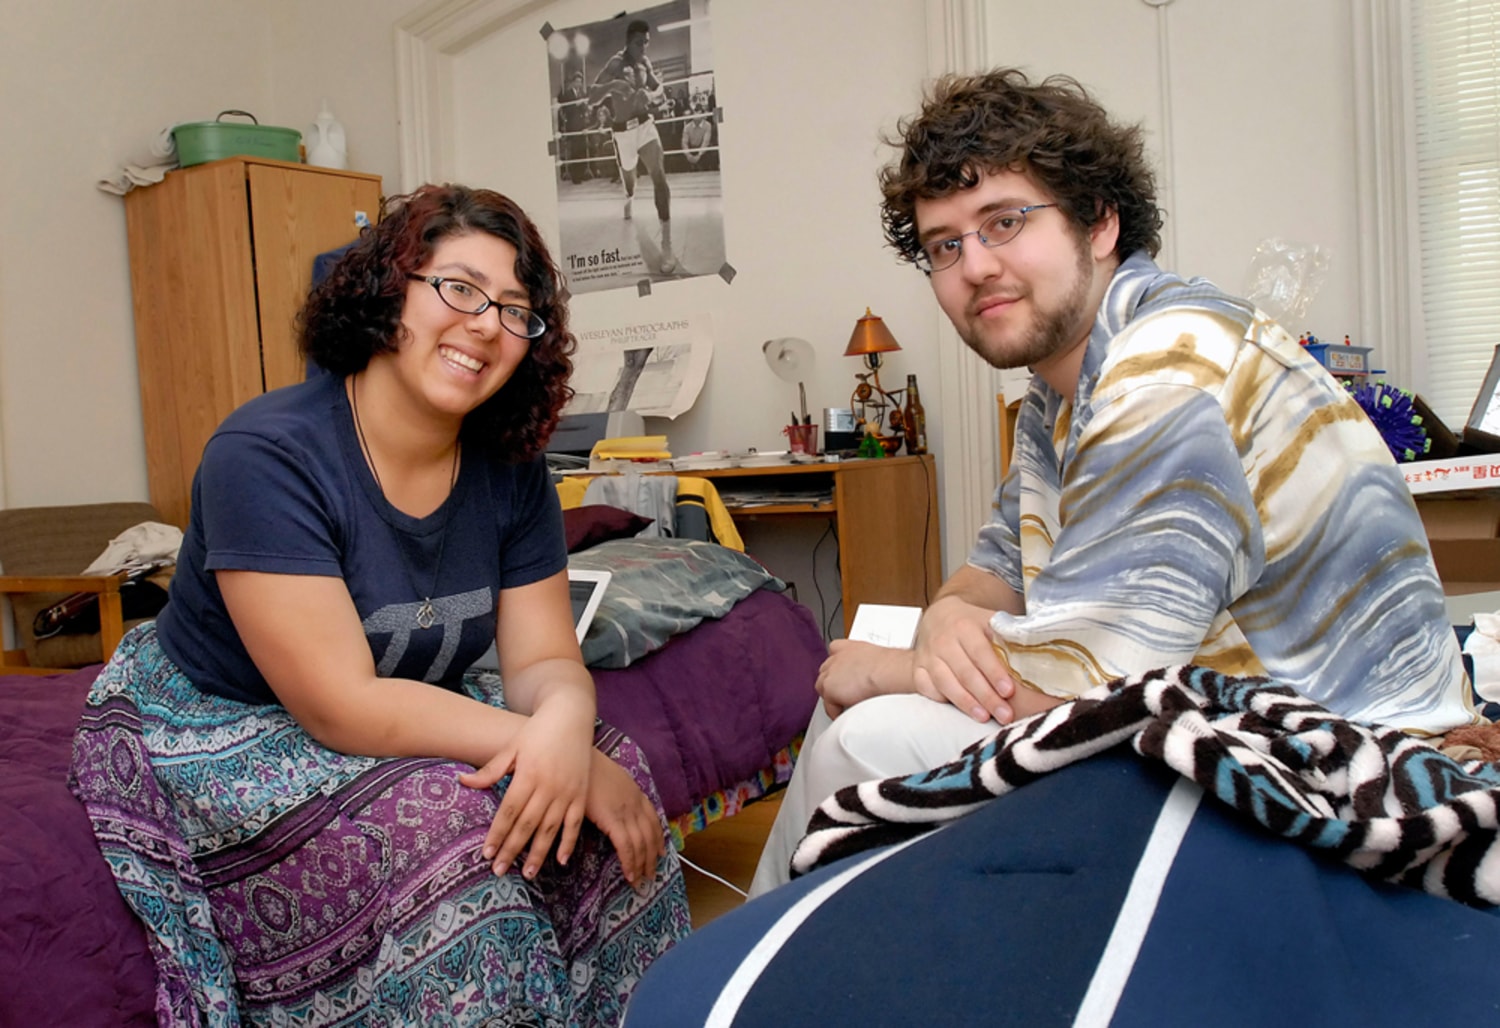 College Dorm Room Sex - First dorms were coed, now rooms are, too